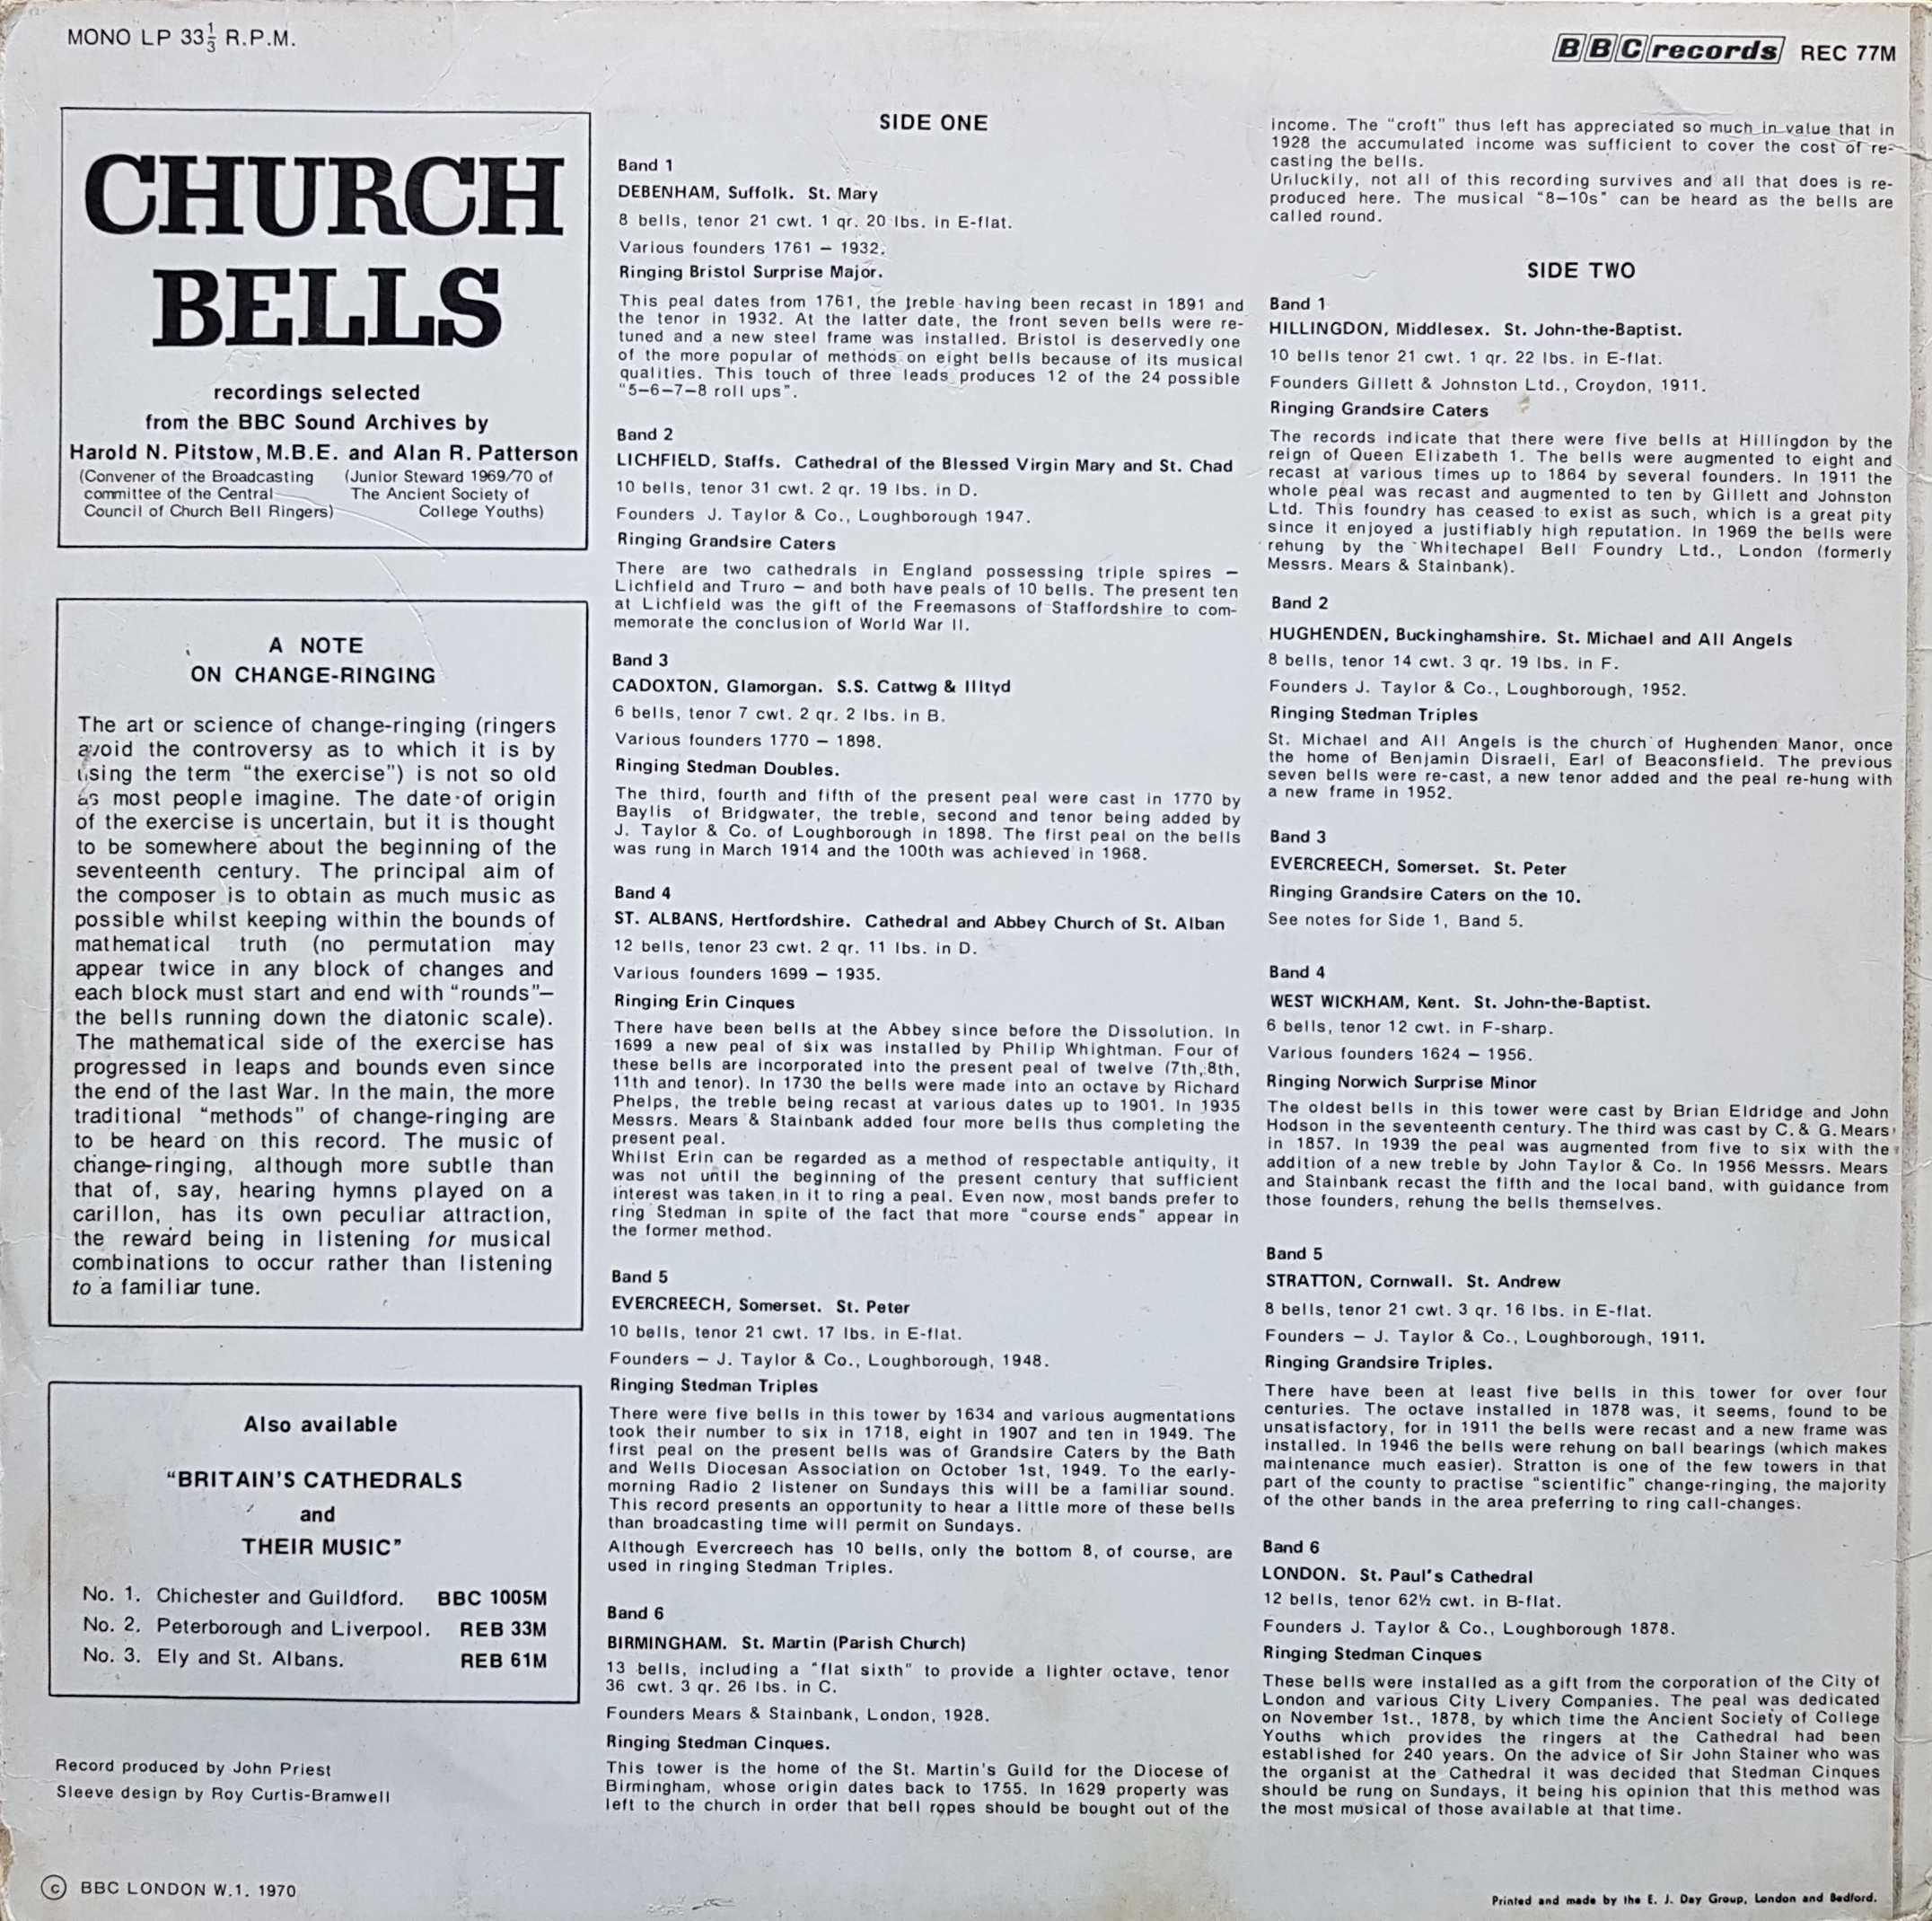 Picture of REC 77 Church bells by artist Various from the BBC records and Tapes library